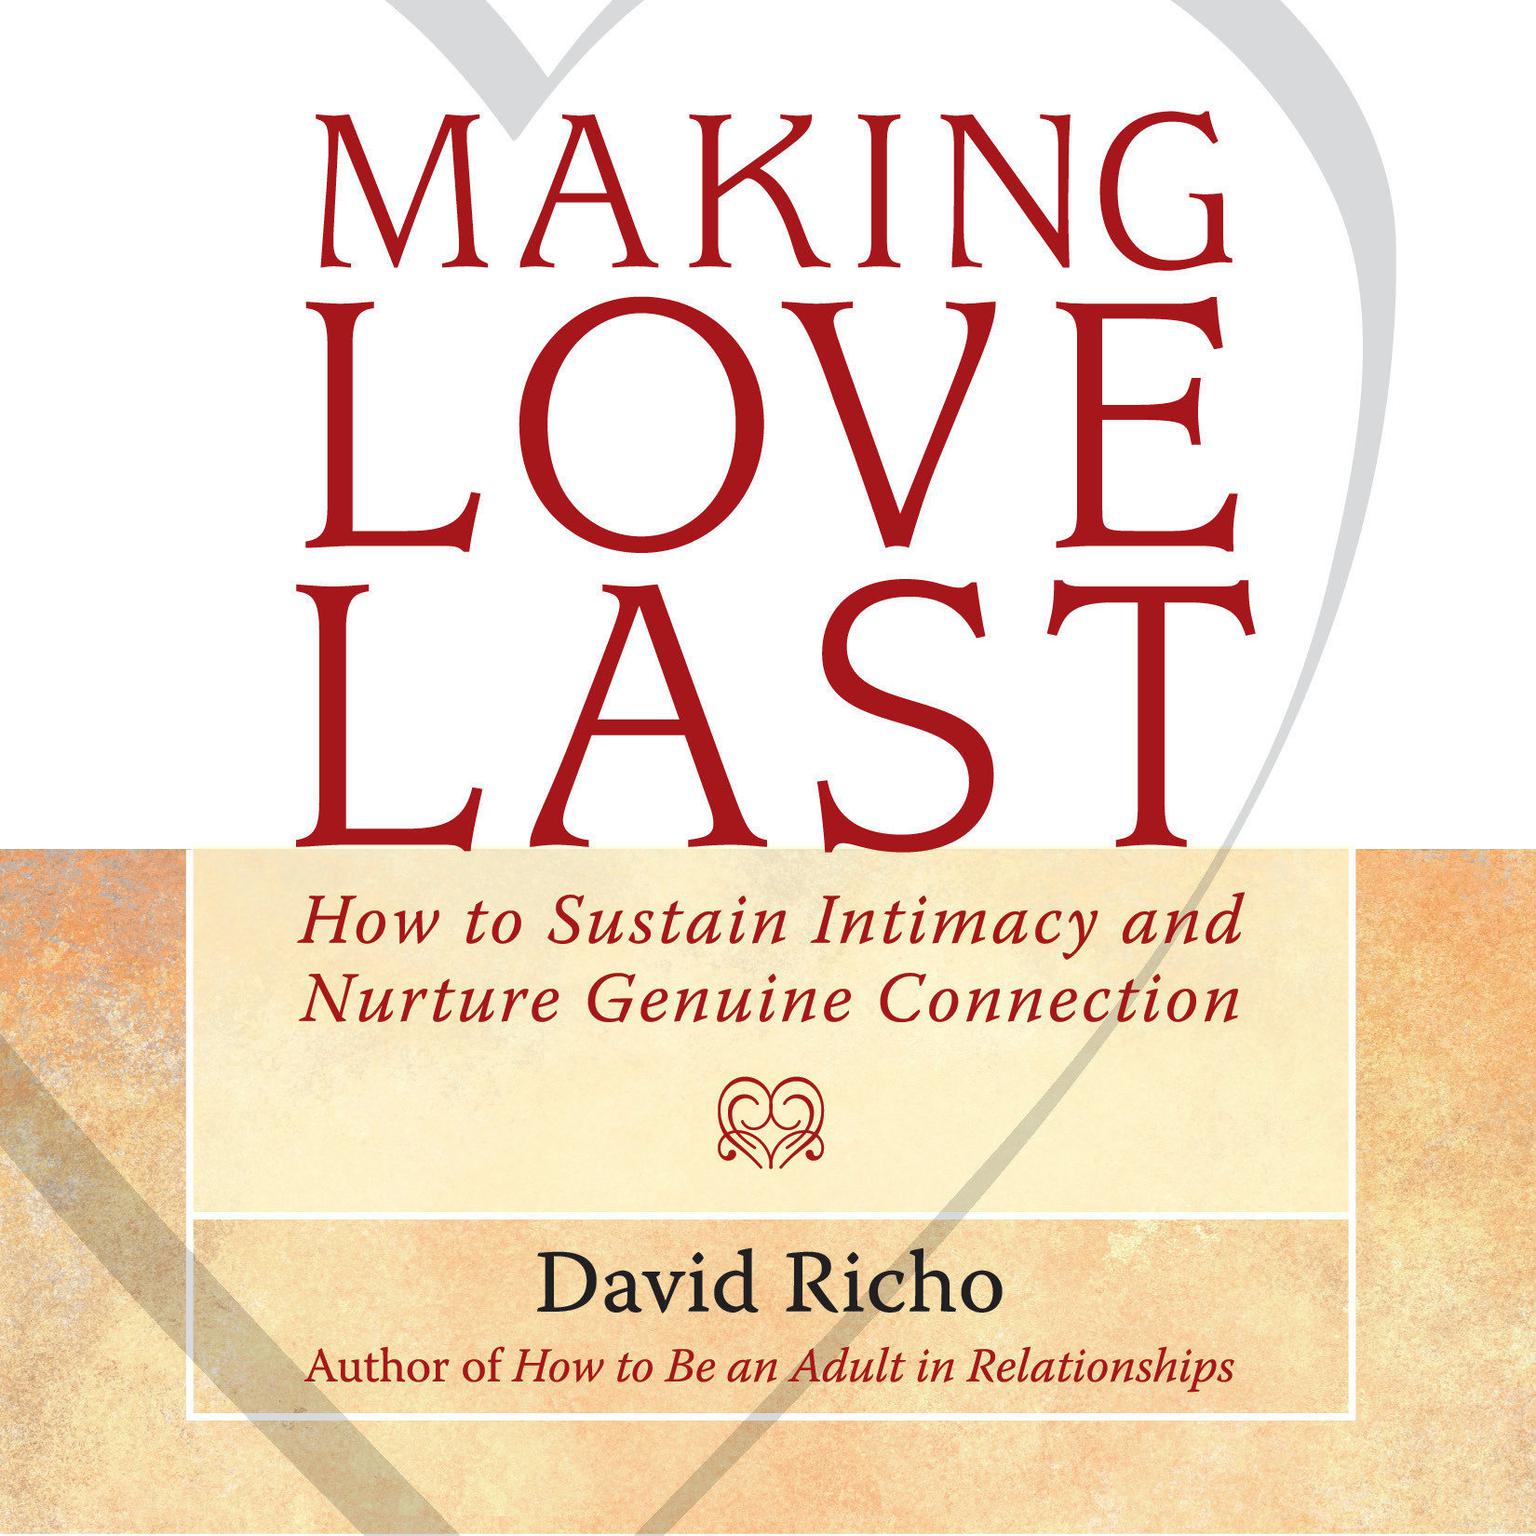 Making Love Last: How to Sustain Intimacy and Nurture Genuine Connection Audiobook, by David Richo